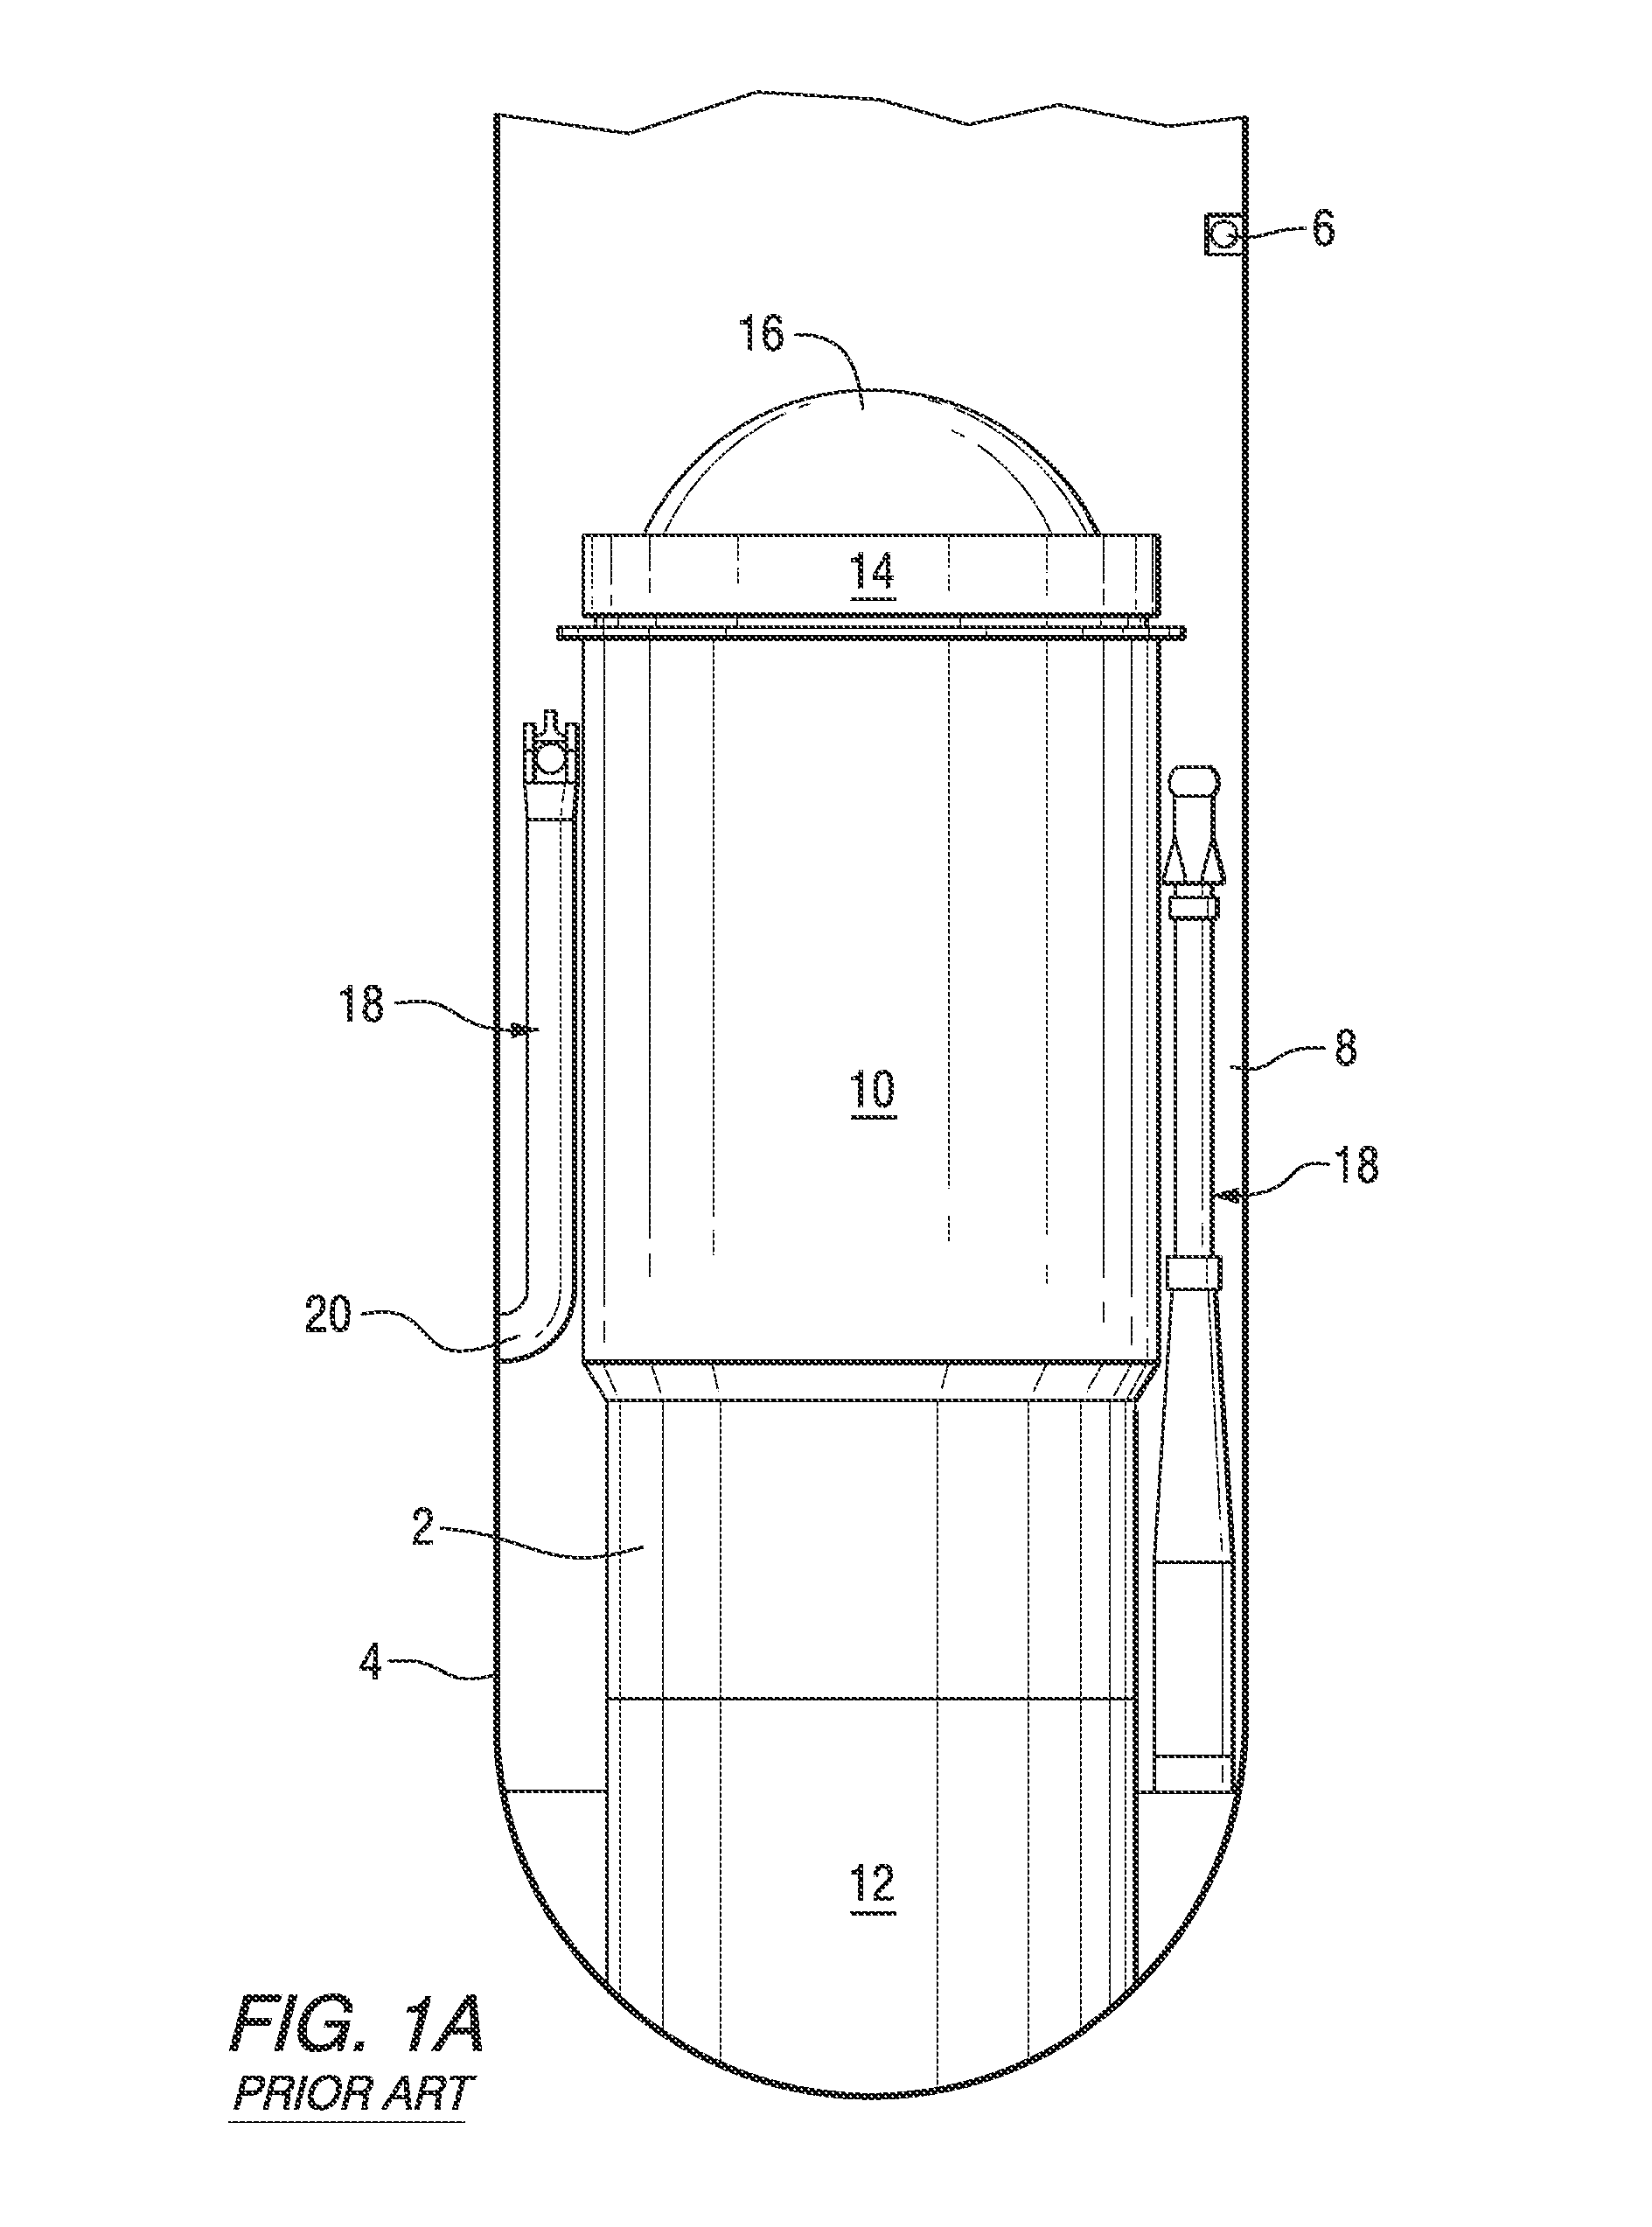 Apparatus and method to inspect, modify, or repair nuclear reactor core shrouds